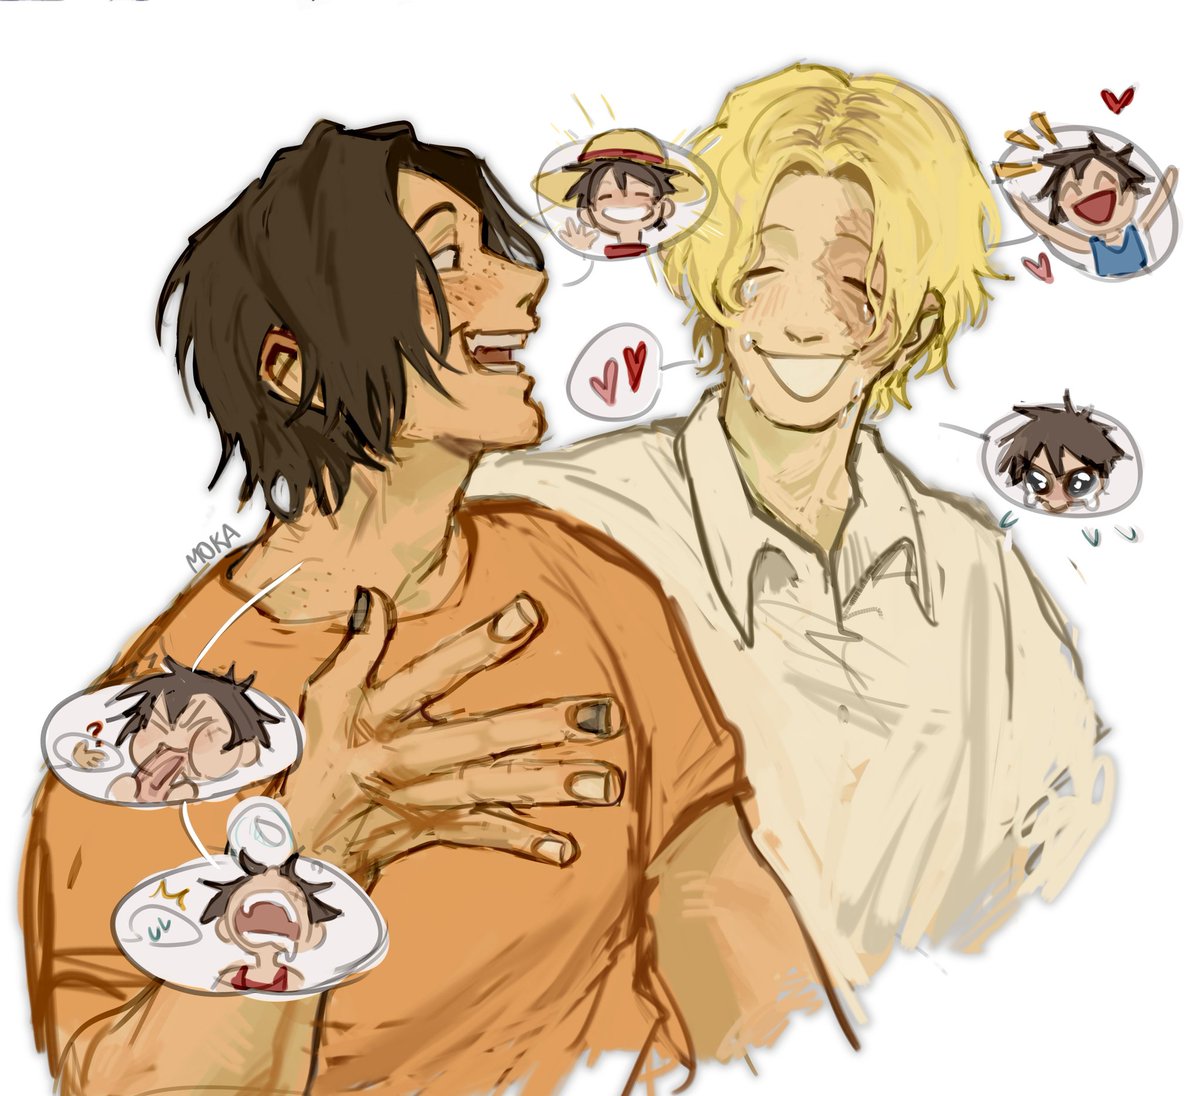 just ace n sabo chatting abt their silly lil bro